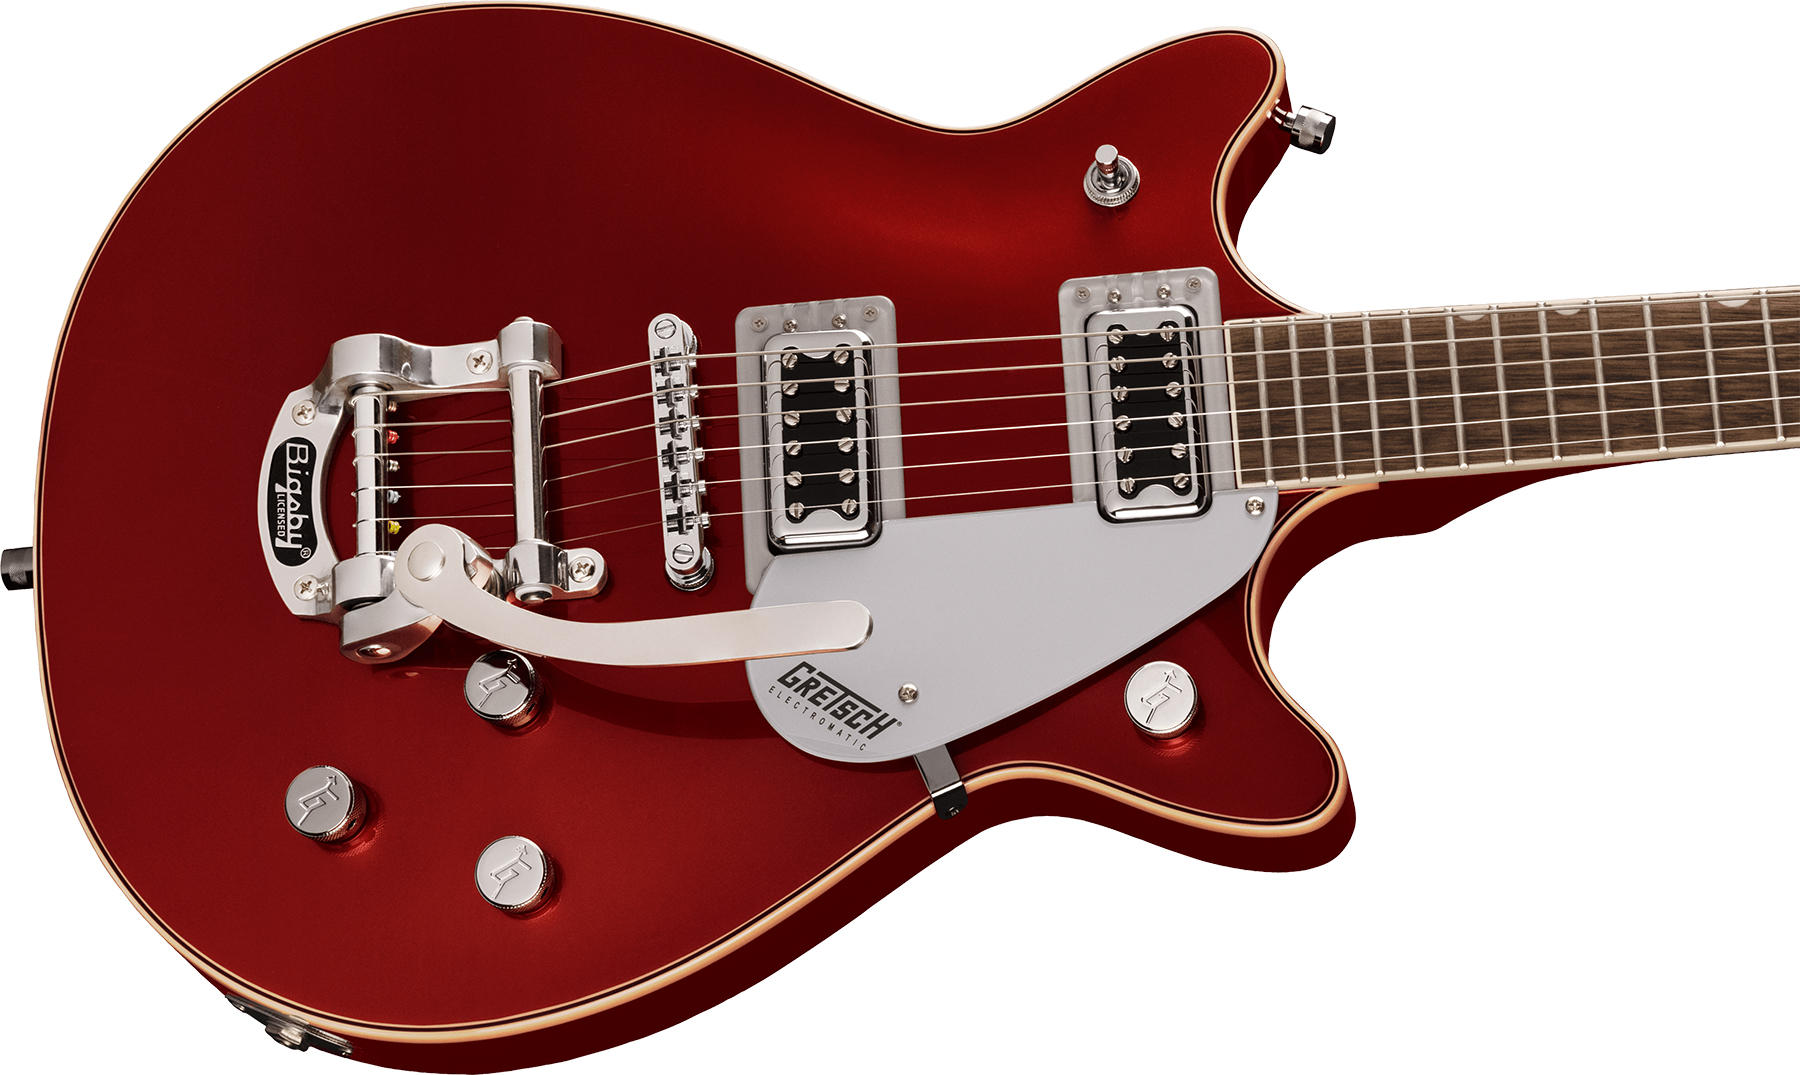 Gretsch G5232t Bigsby Electromatic Double Jet Ft 2h Trem Lau - Firestick Red - Double cut electric guitar - Variation 2